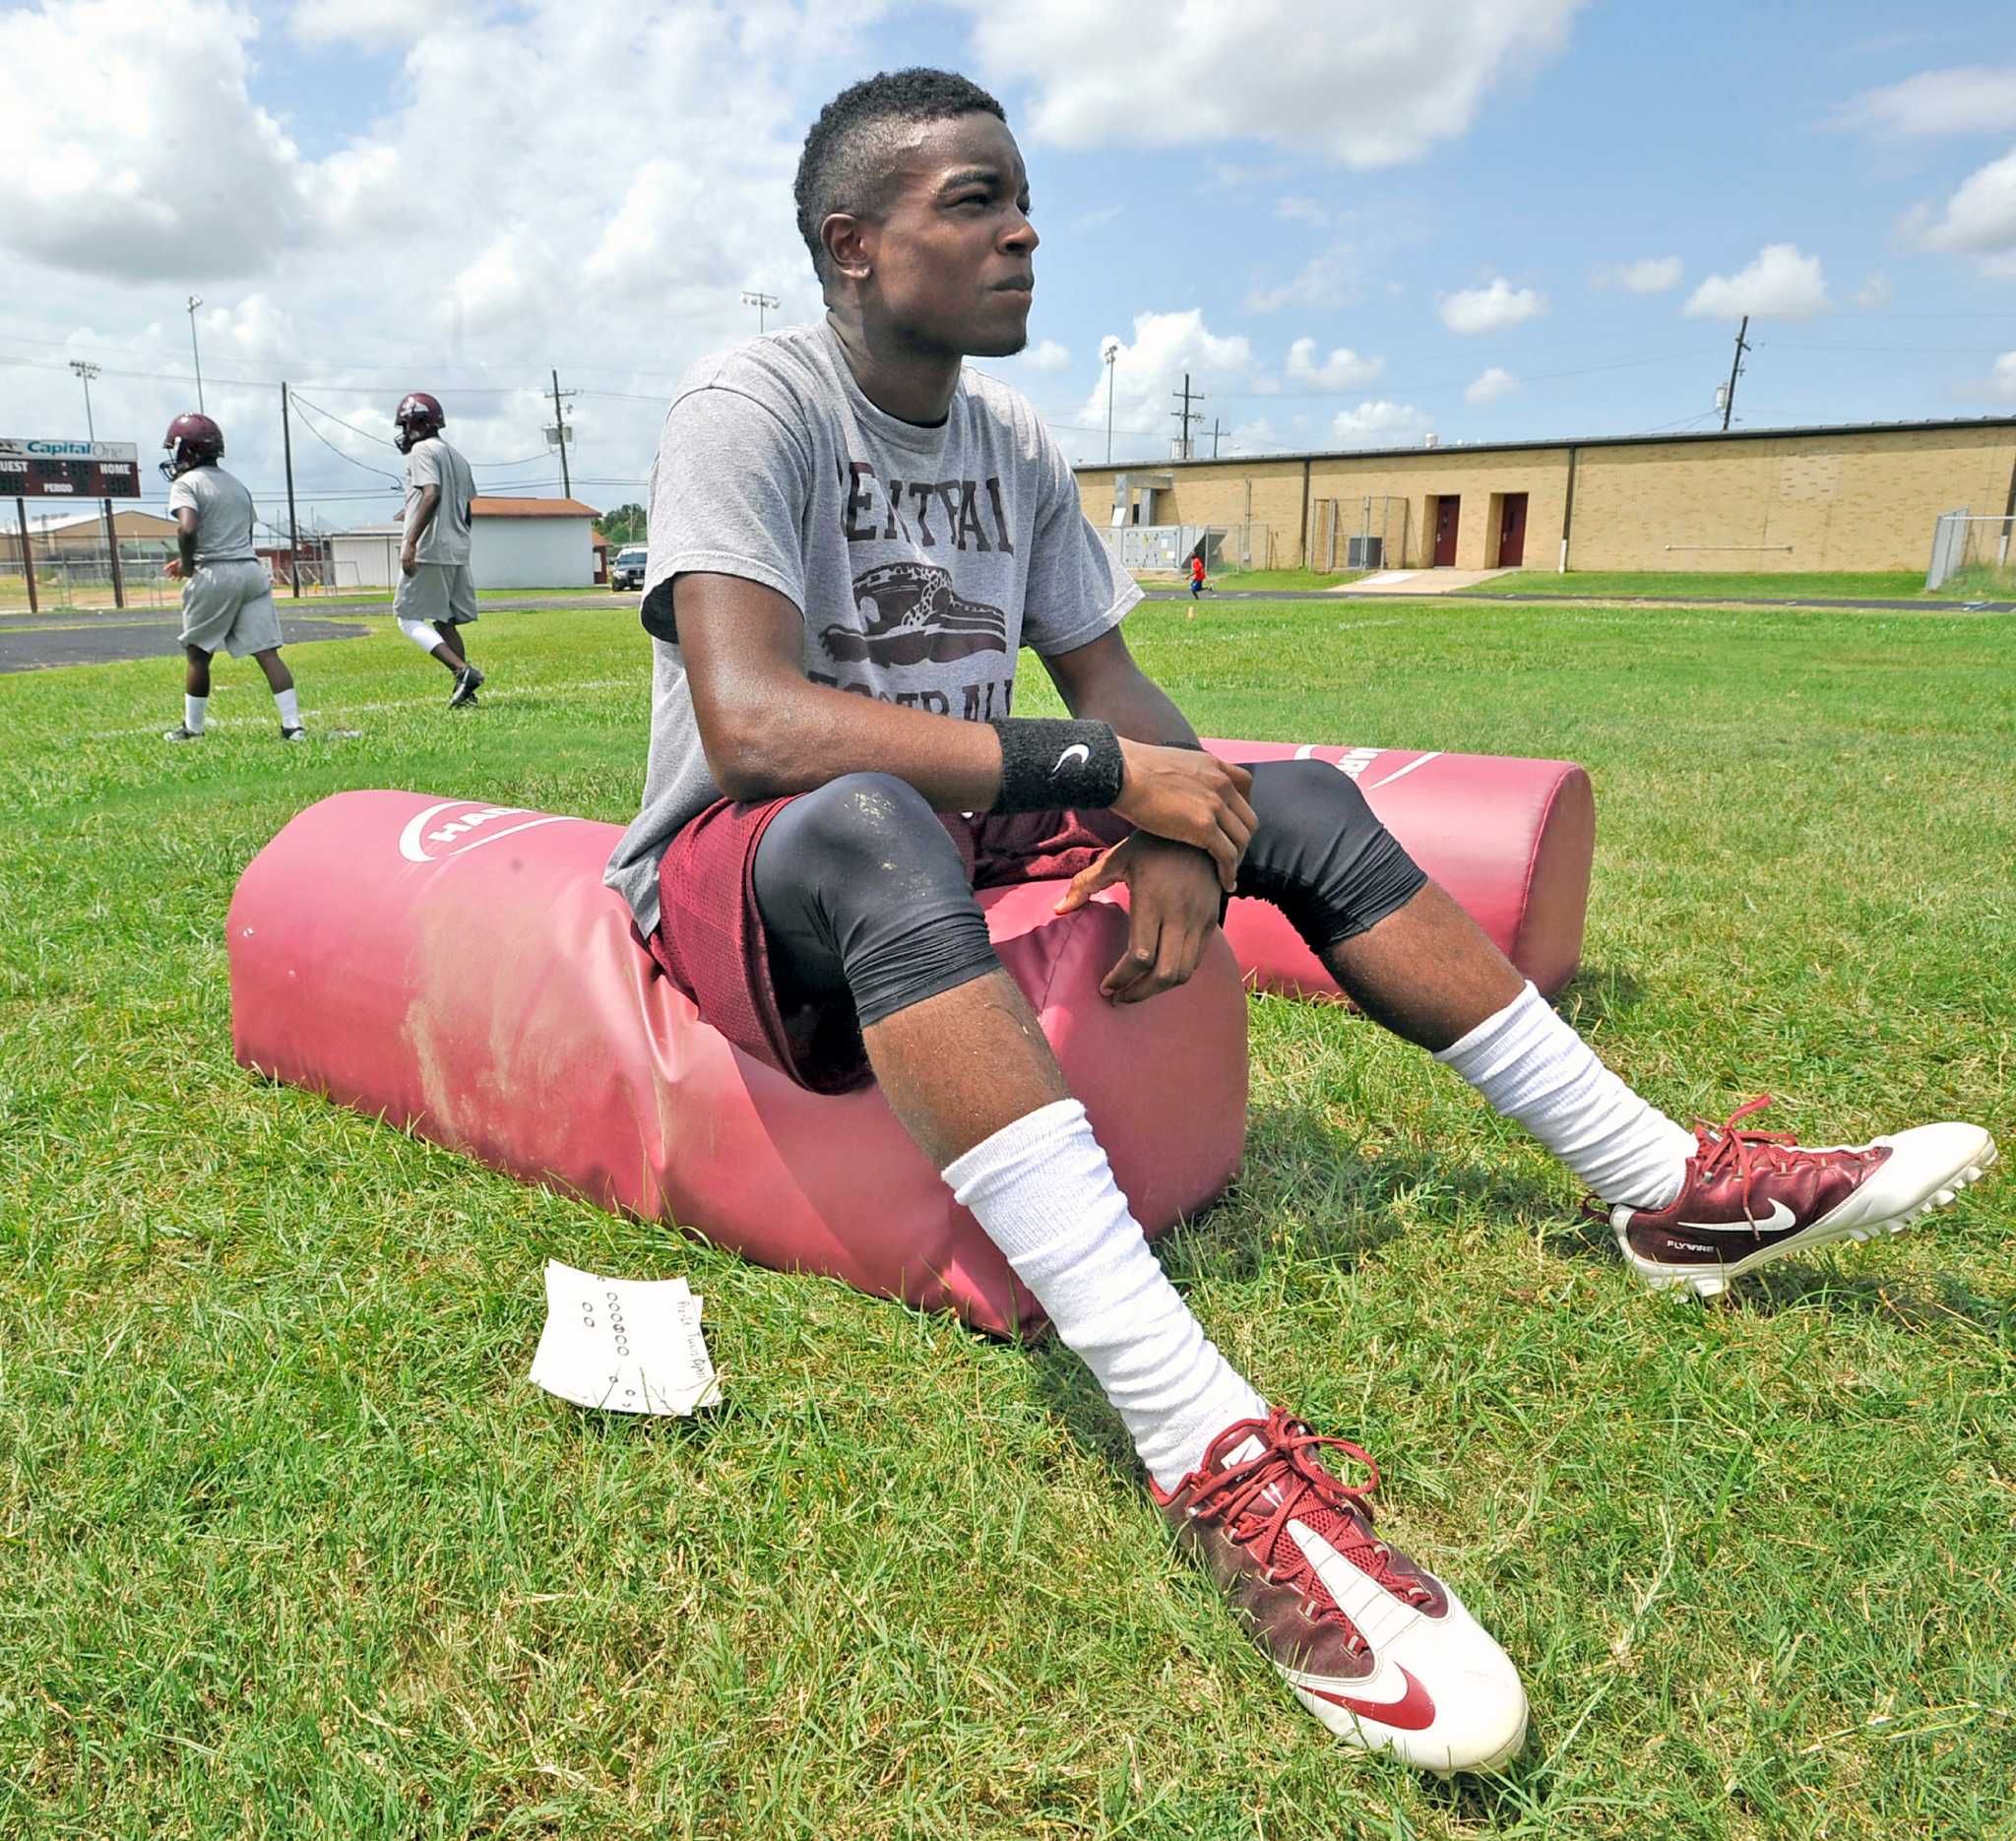 Central's Malbrough commits to Morgan State - Beaumont Enterprise2048 x 1870